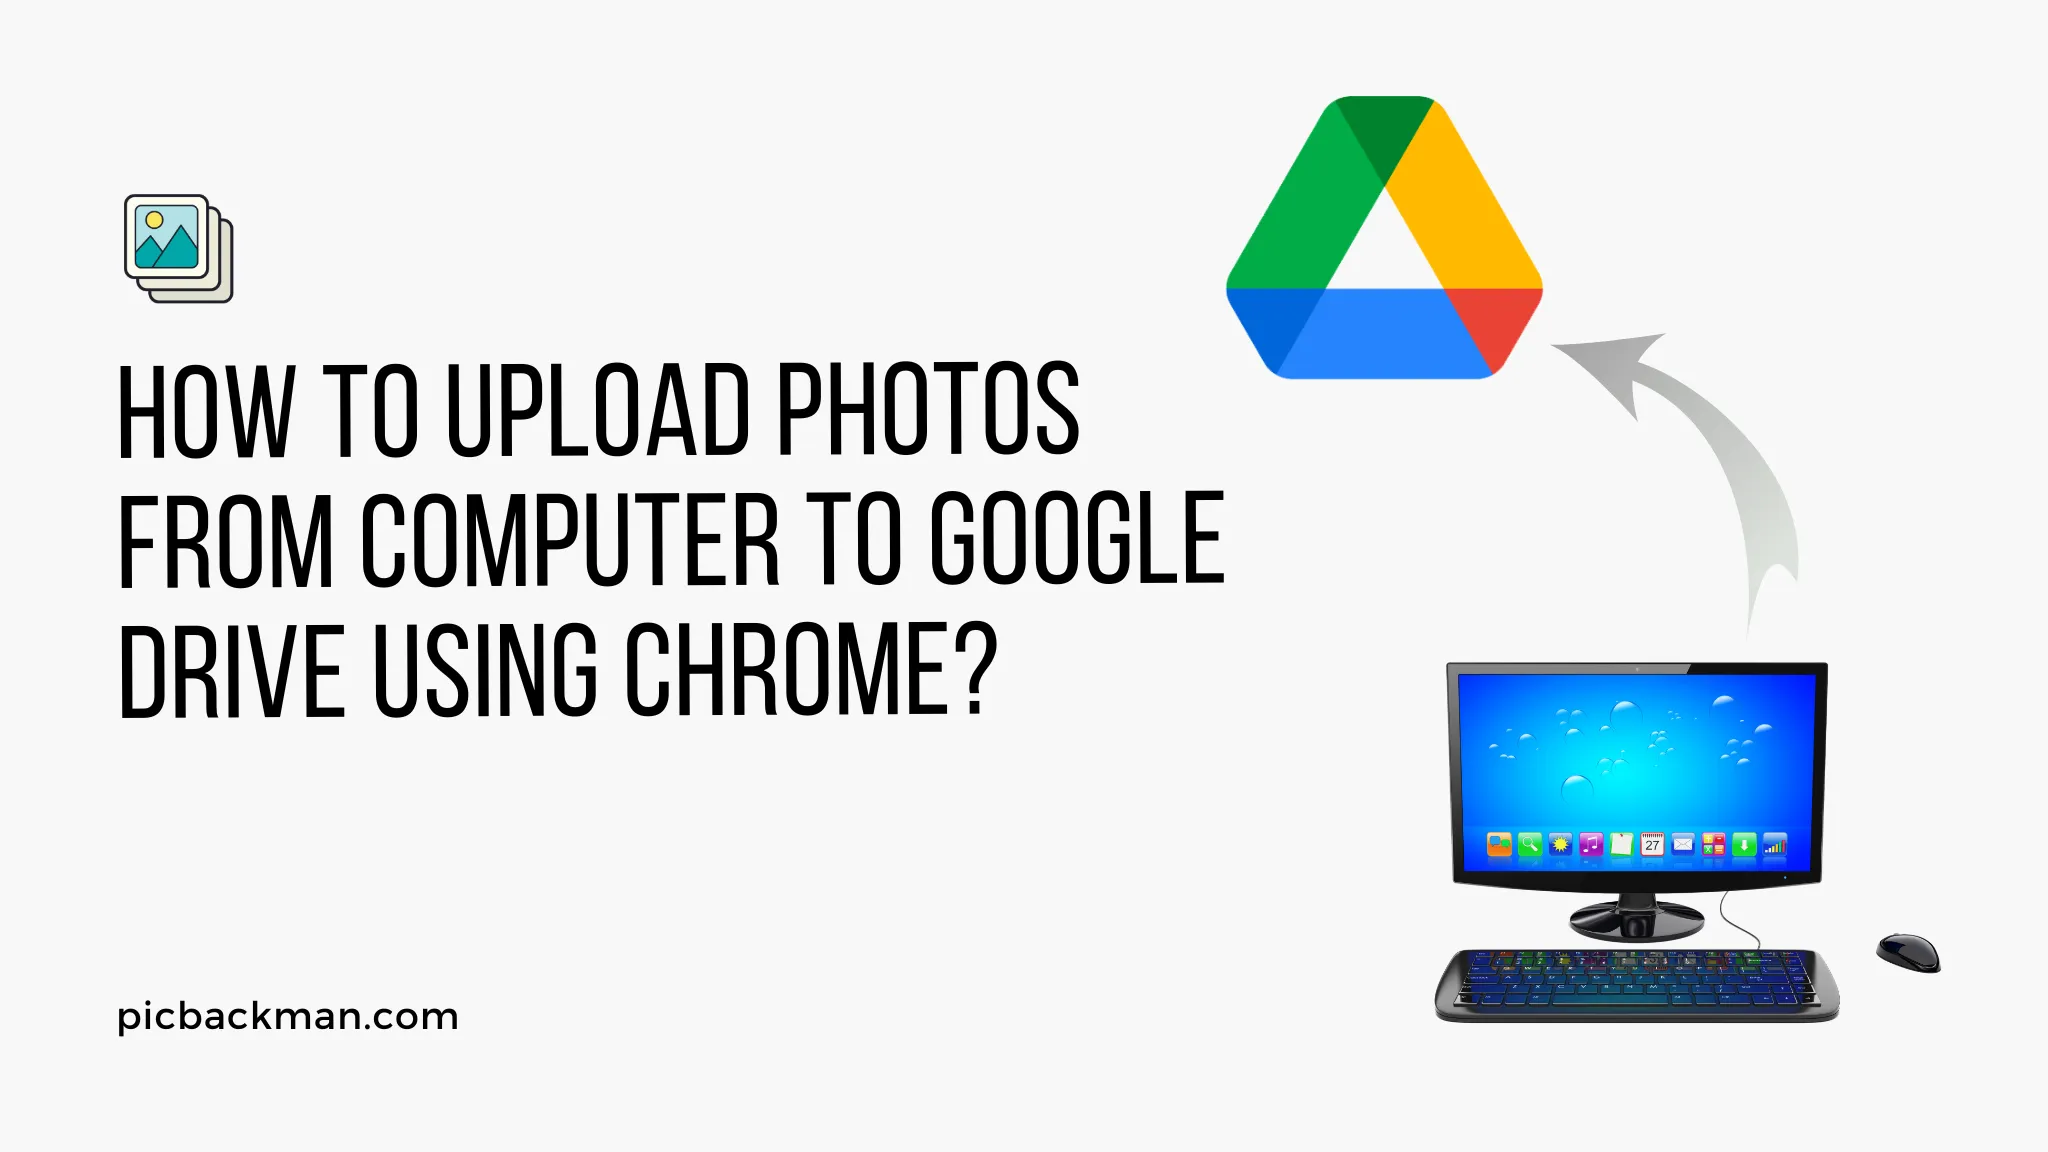 How to Upload Photos from Computer to Google Drive using Chrome